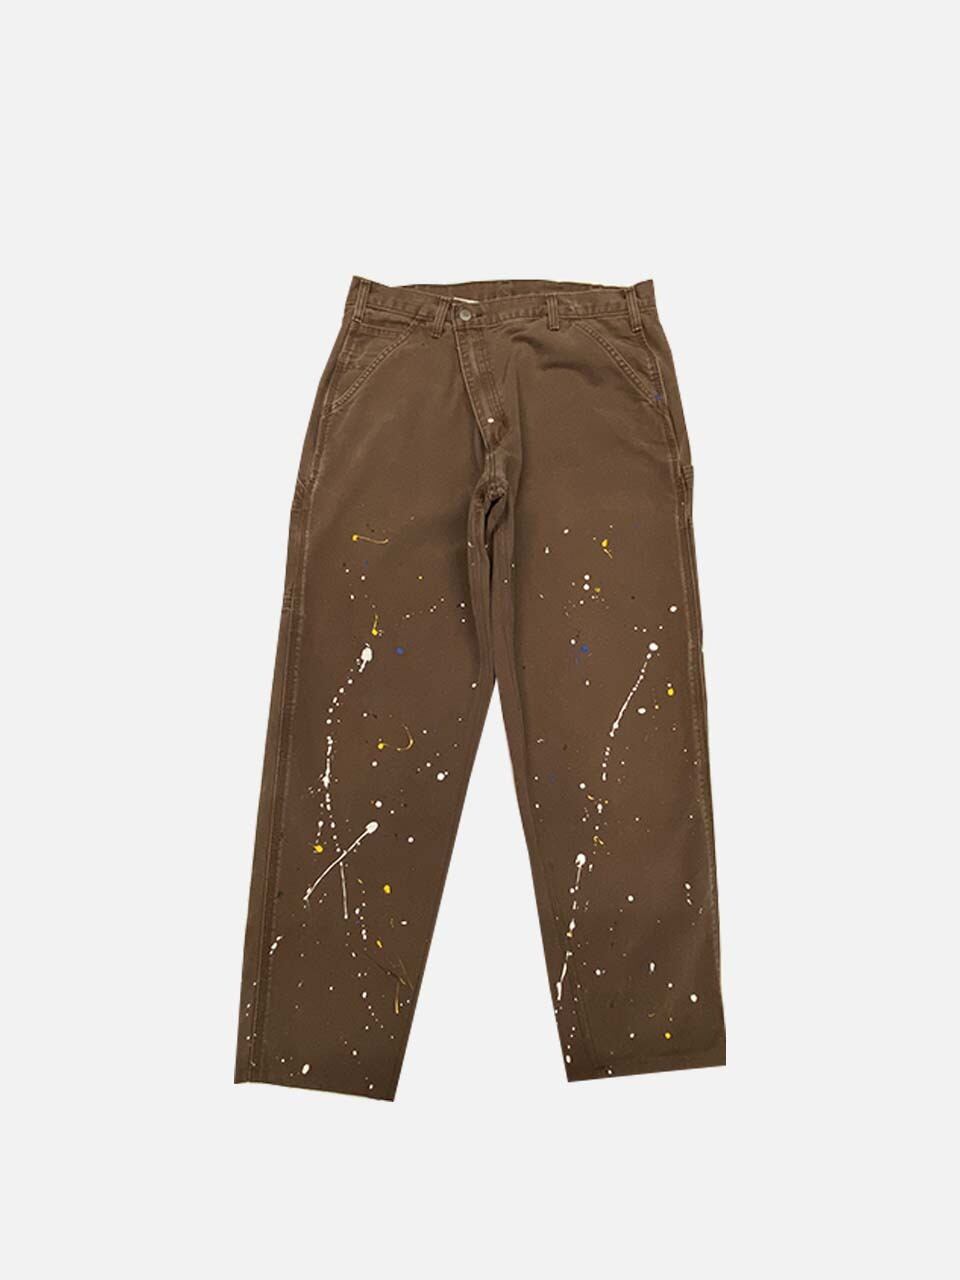 RE:WEST PAINTING PANTS